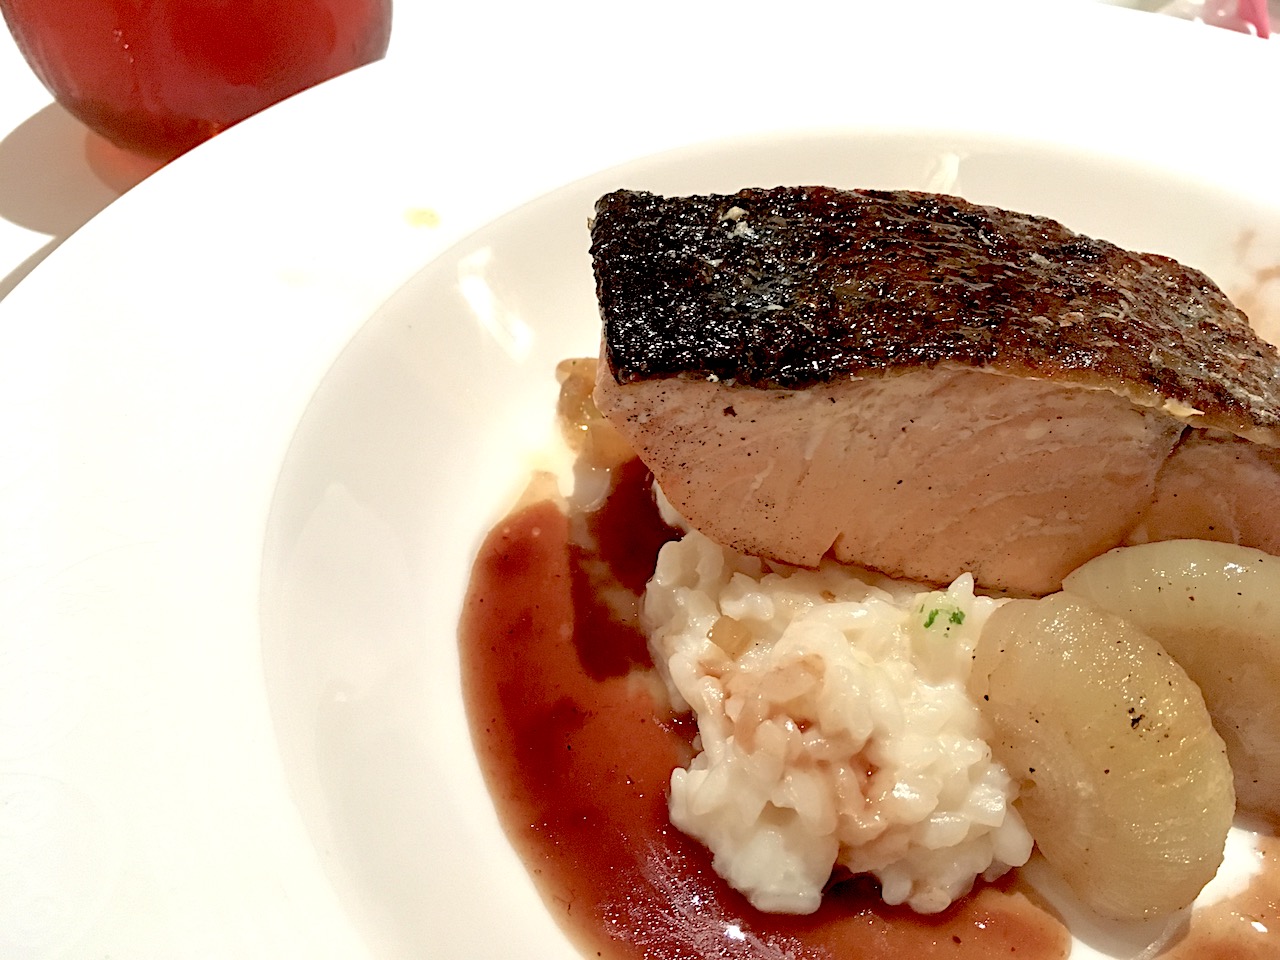 Salmon dish from Palo on board the Disney cruise ships is to die for!